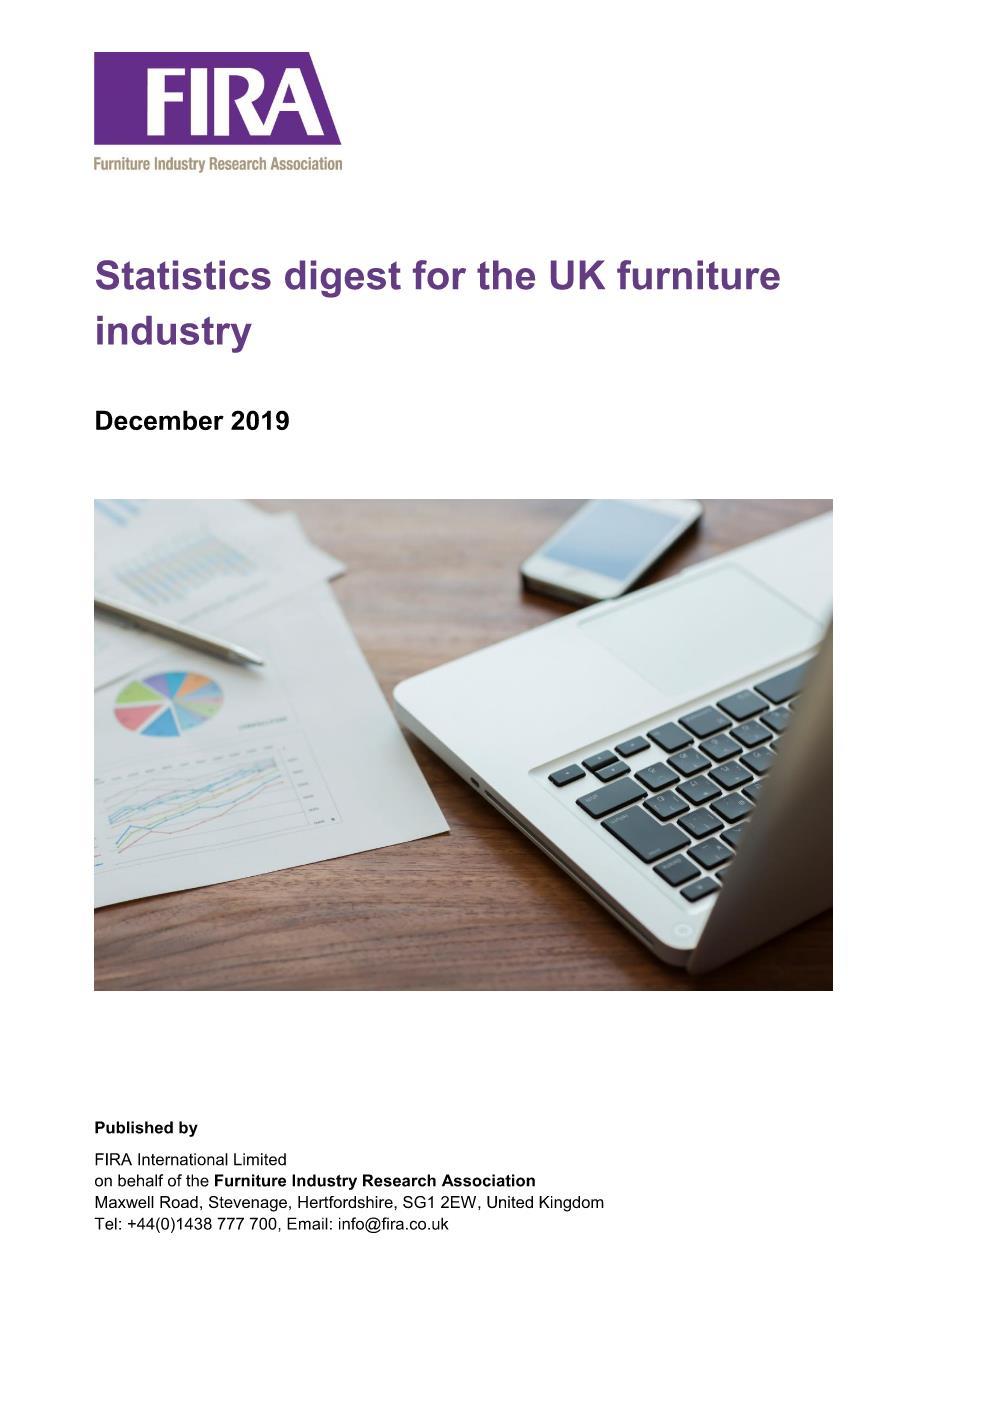 Statistical Digest for the Furniture Industry 2019